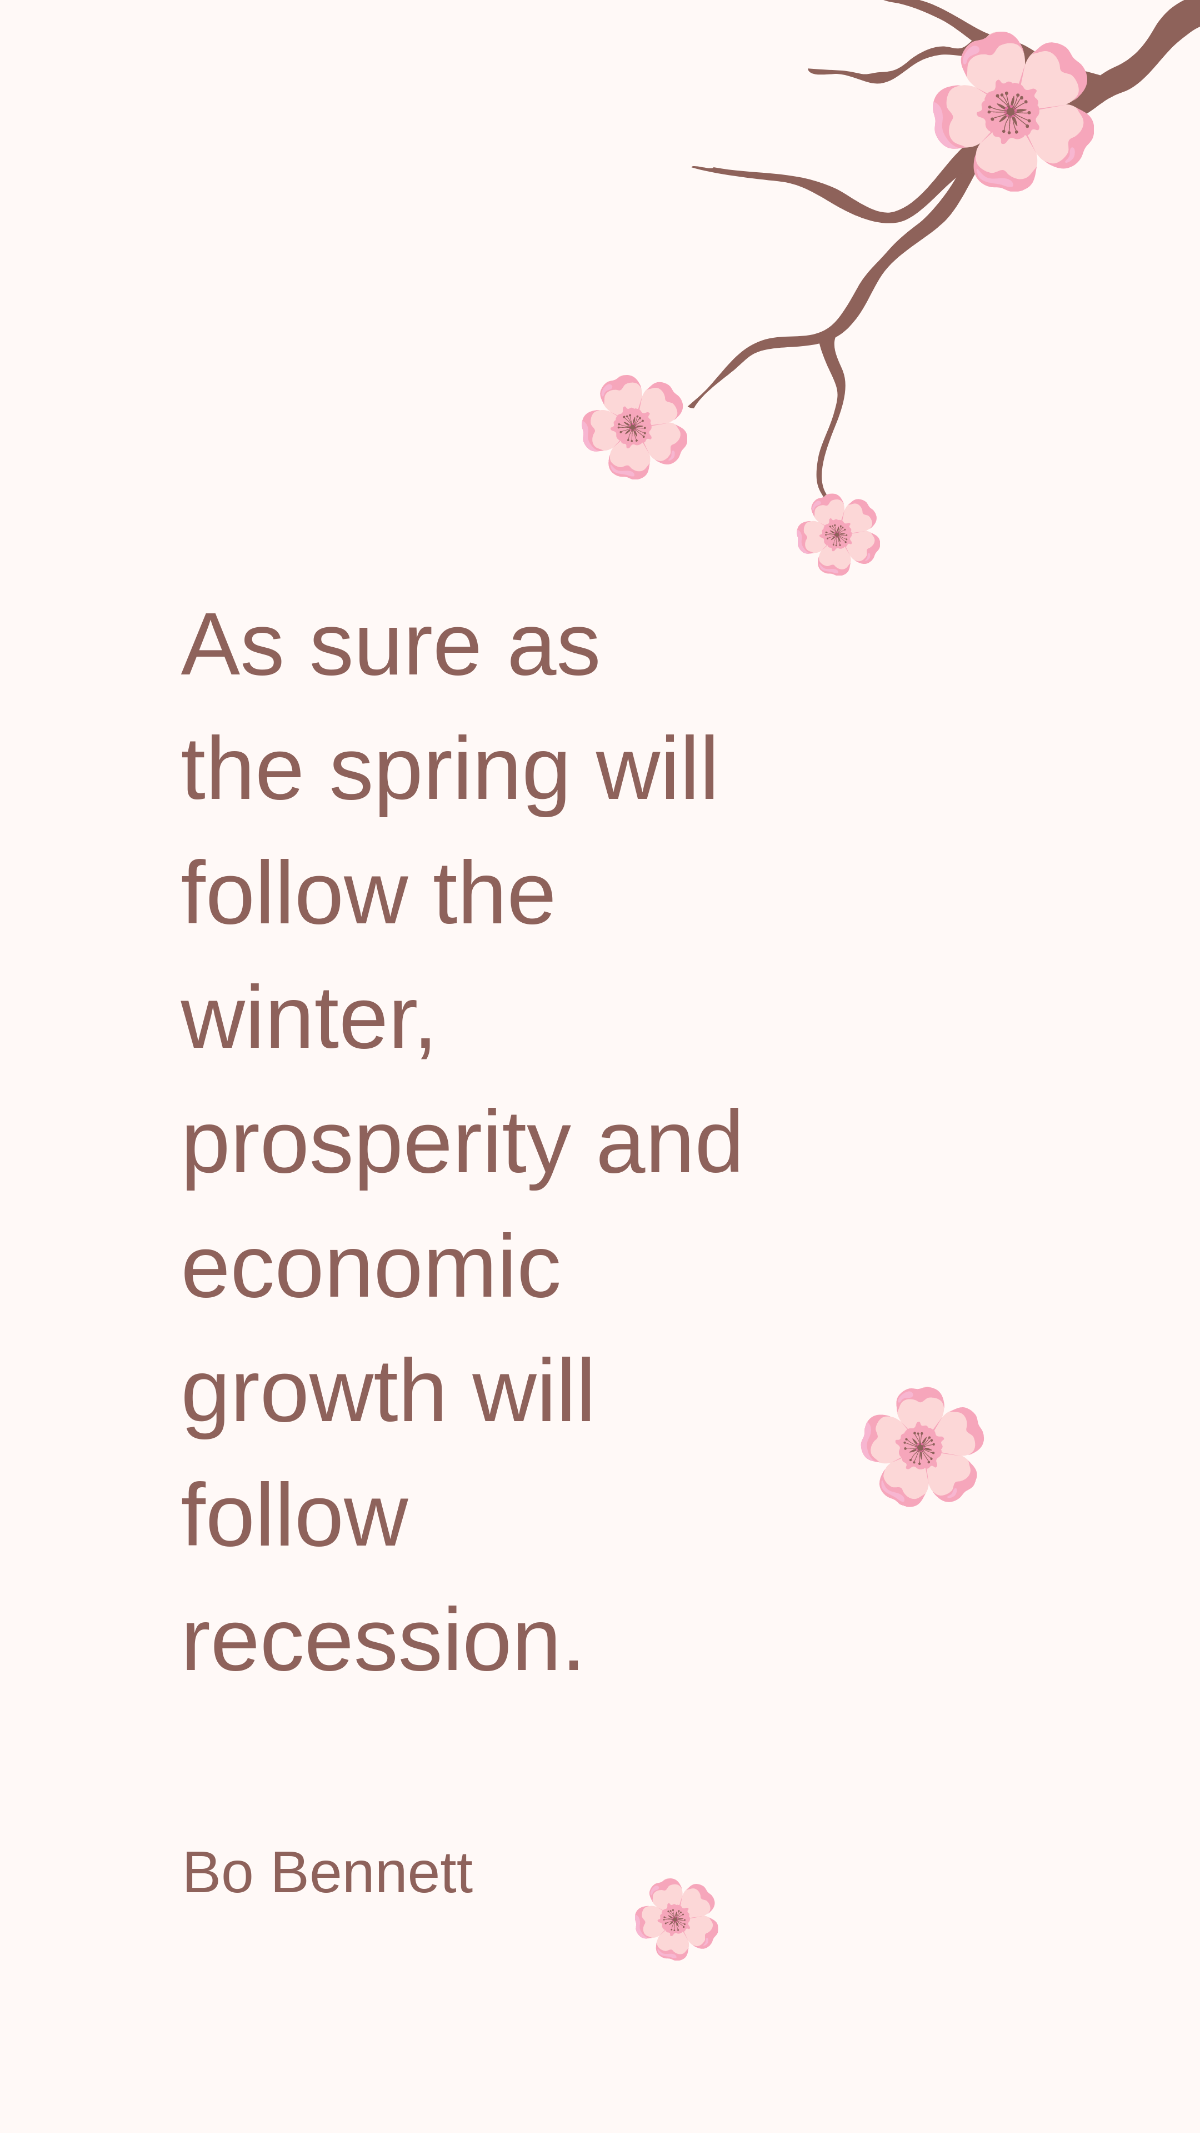 Bo Bennett - As sure as the spring will follow the winter, prosperity and economic growth will follow recession. Template